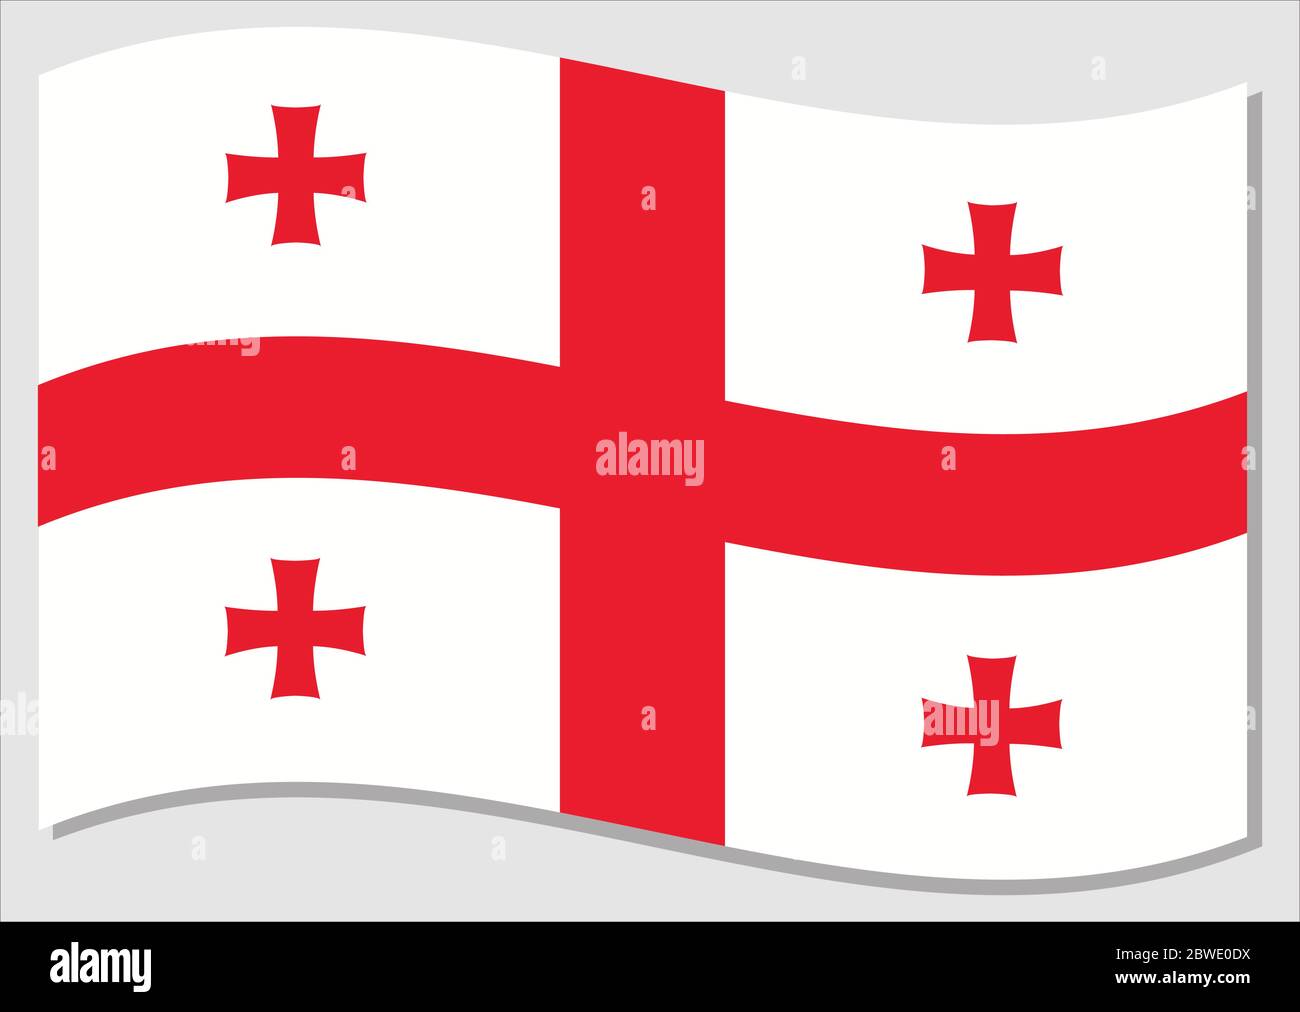 Waving flag of Georgia vector graphic. Waving Georgian flag illustration. Georgia country flag wavin in the wind is a symbol of freedom and independen Stock Vector